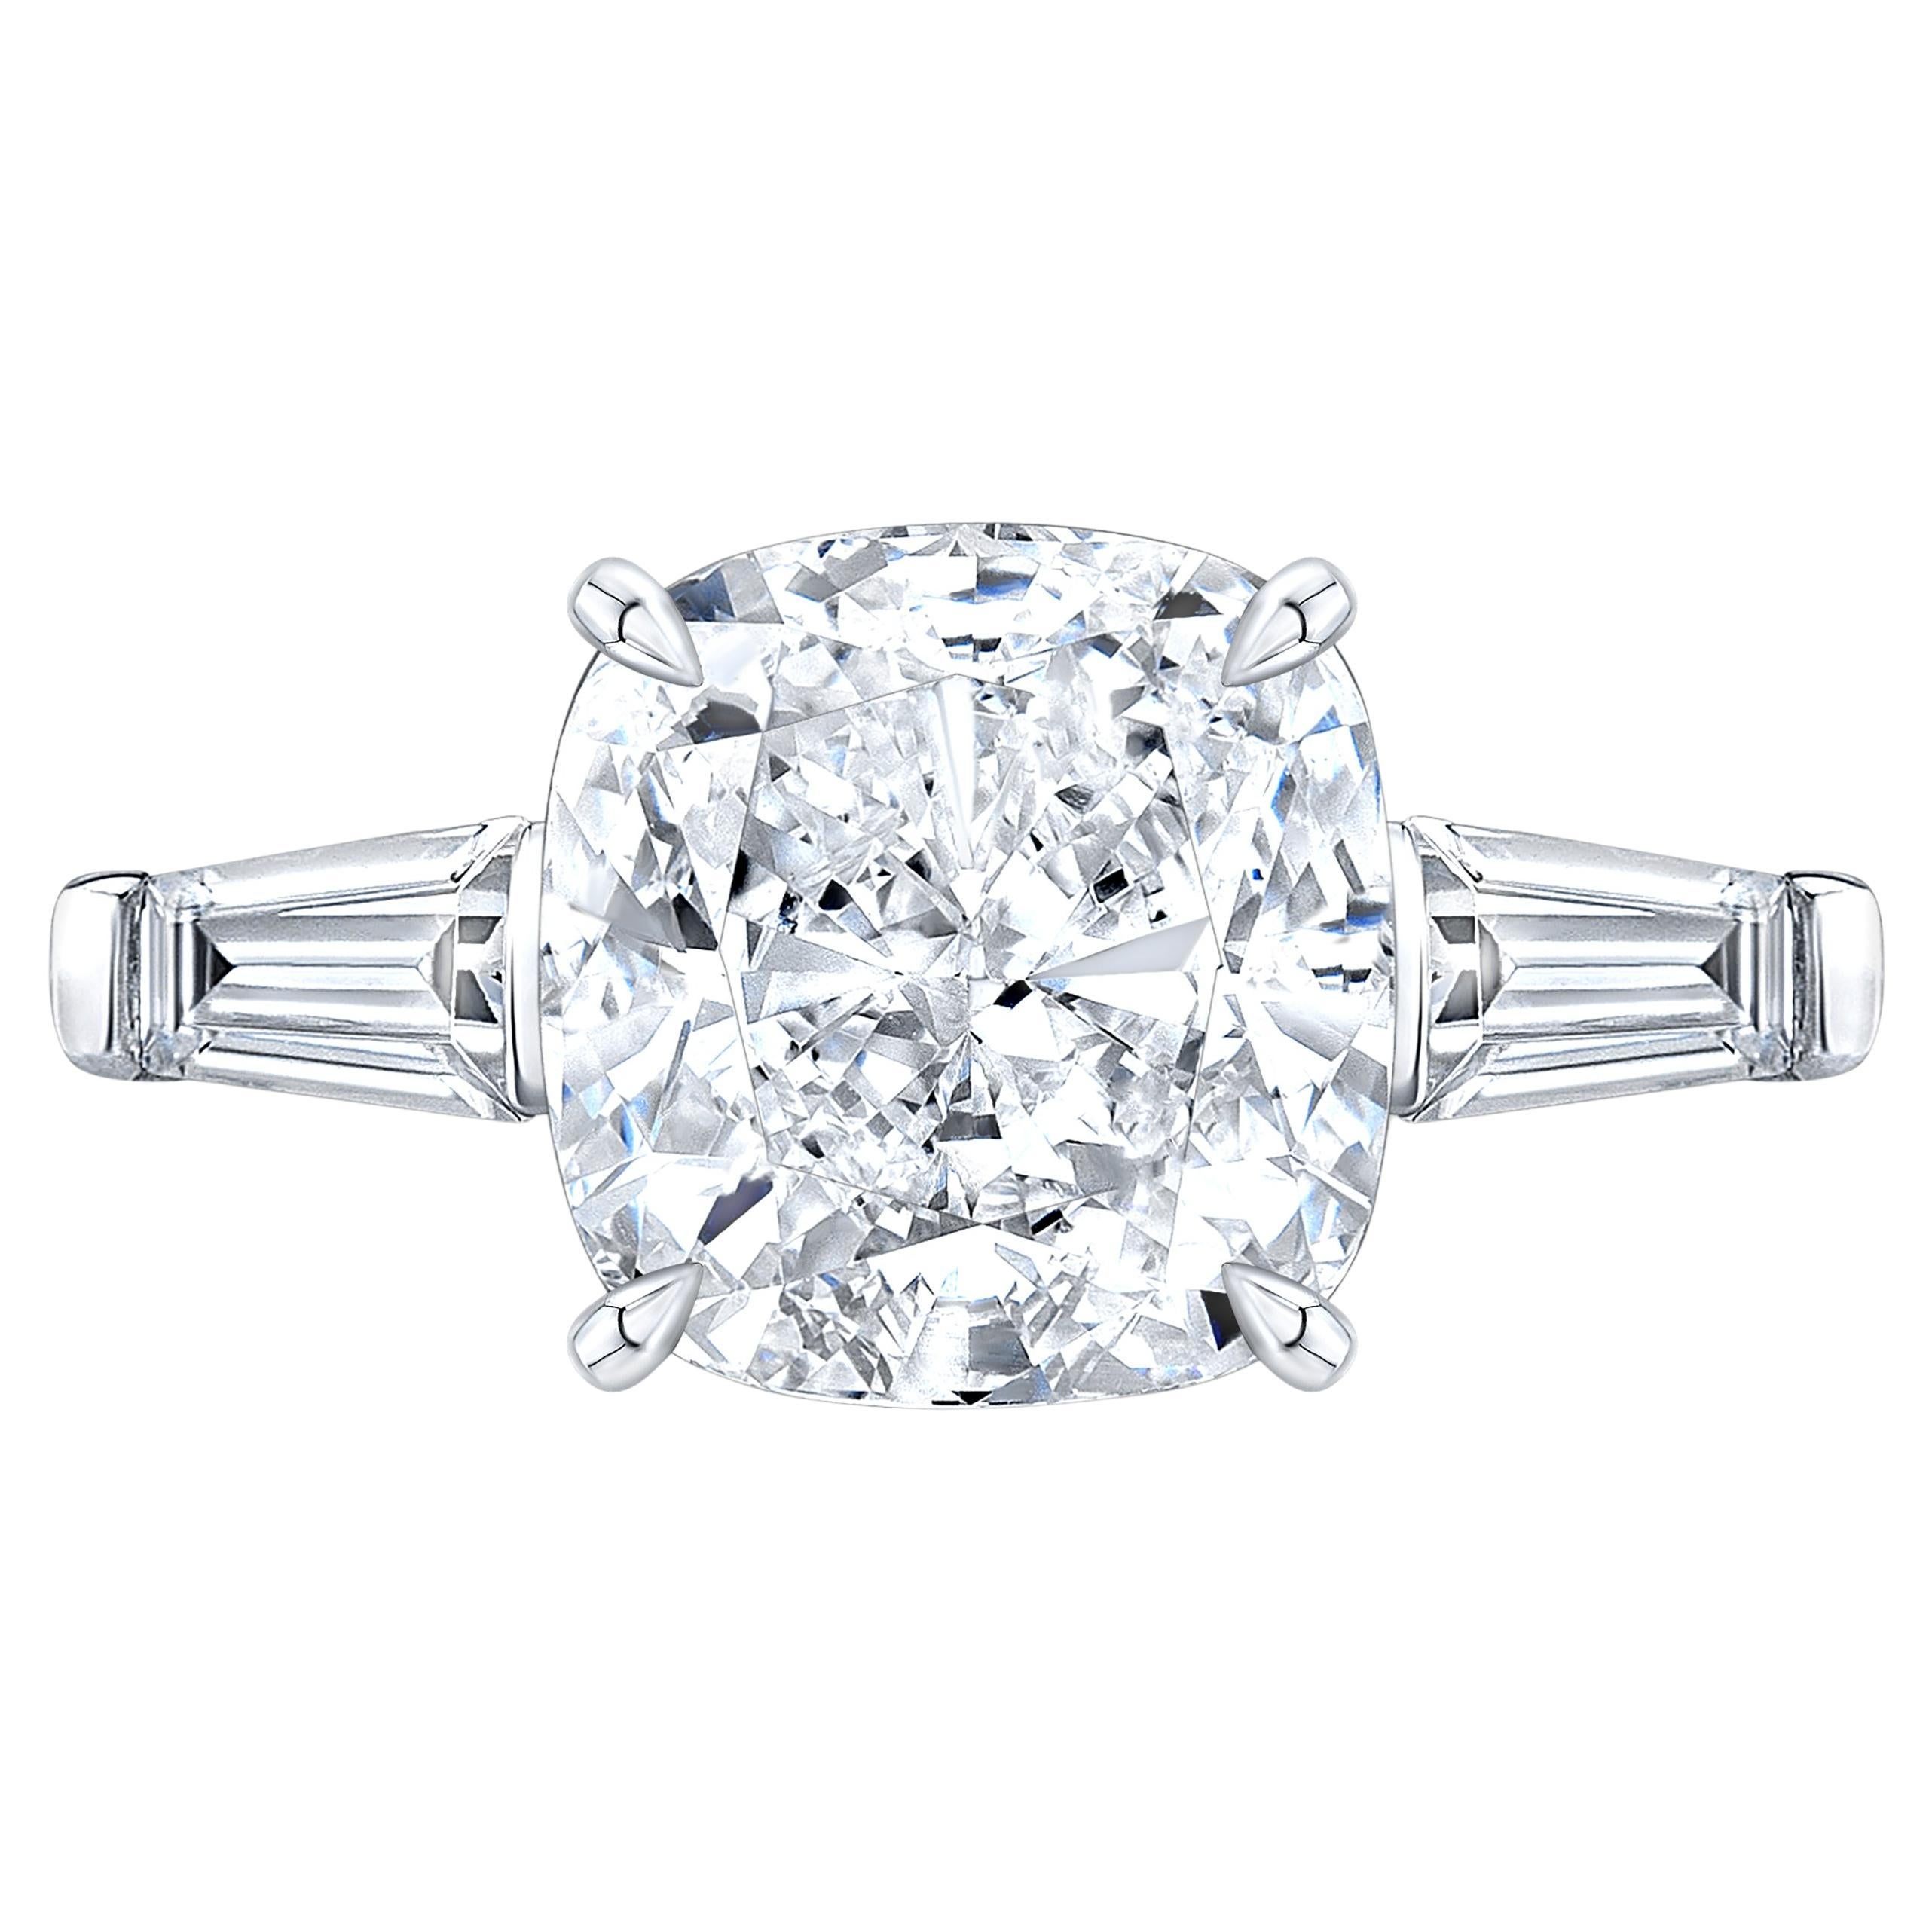 An exquisite ring composed by a 5 carat cushion cut diamond with two side tapered baguette diamonds. 
The setting is made in solid 18 carats white gold
D color
VS1 clarity
   